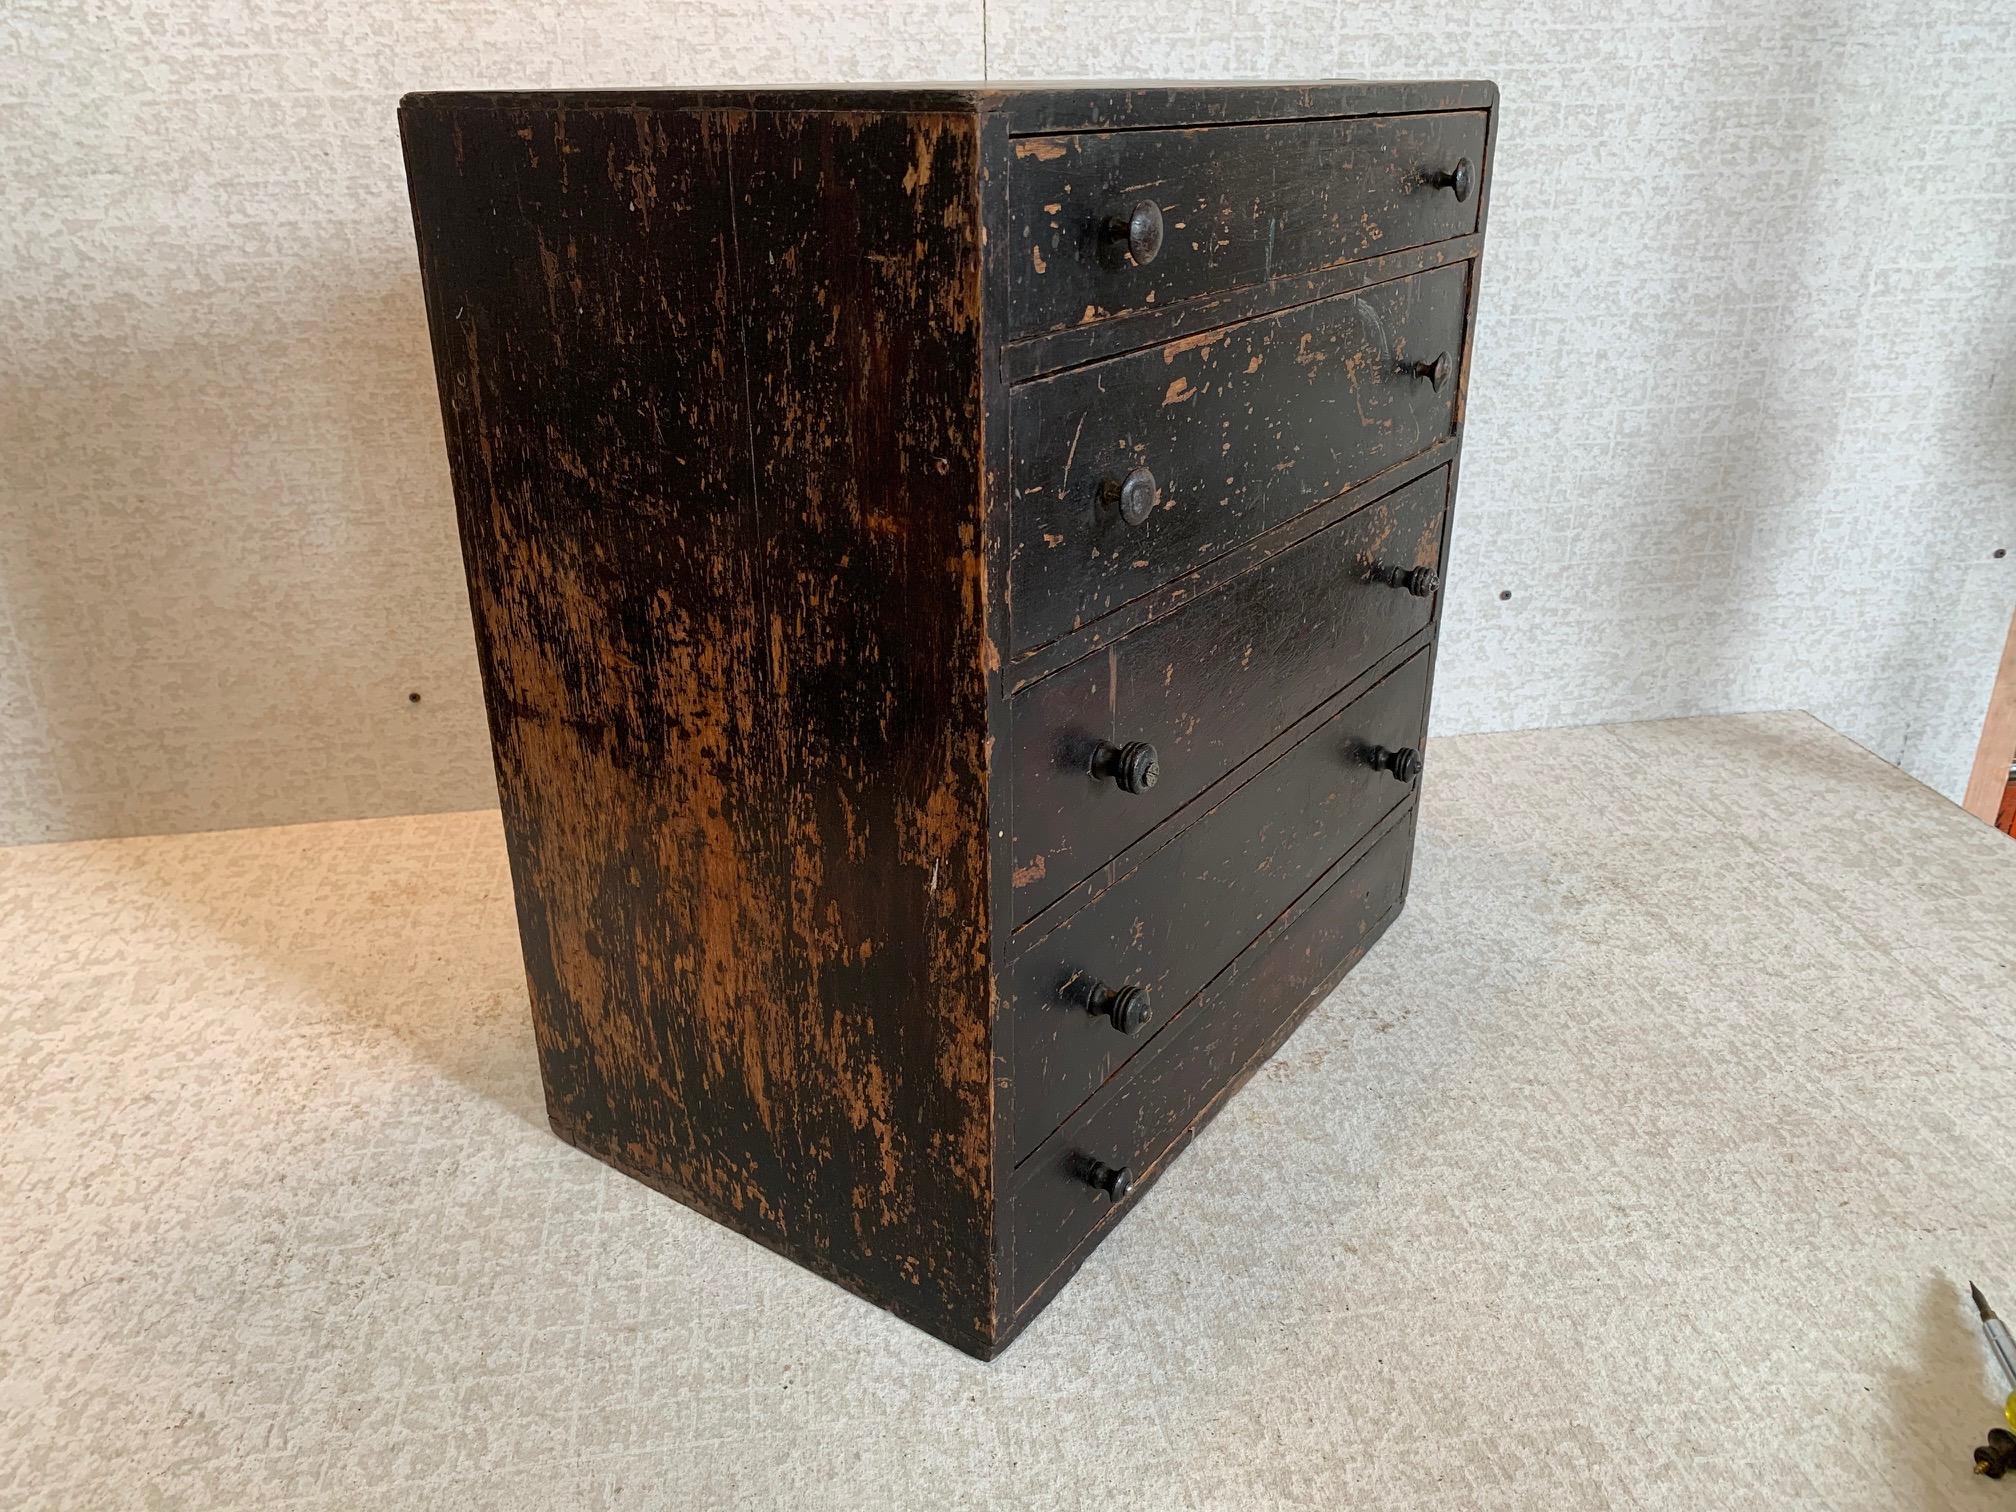 Five-drawer typeset cabinet in birch with pine secondary wood. Mixed metal and wooden knobs. Some drawers retain dividers with remnant paper labels. Dark original finish.